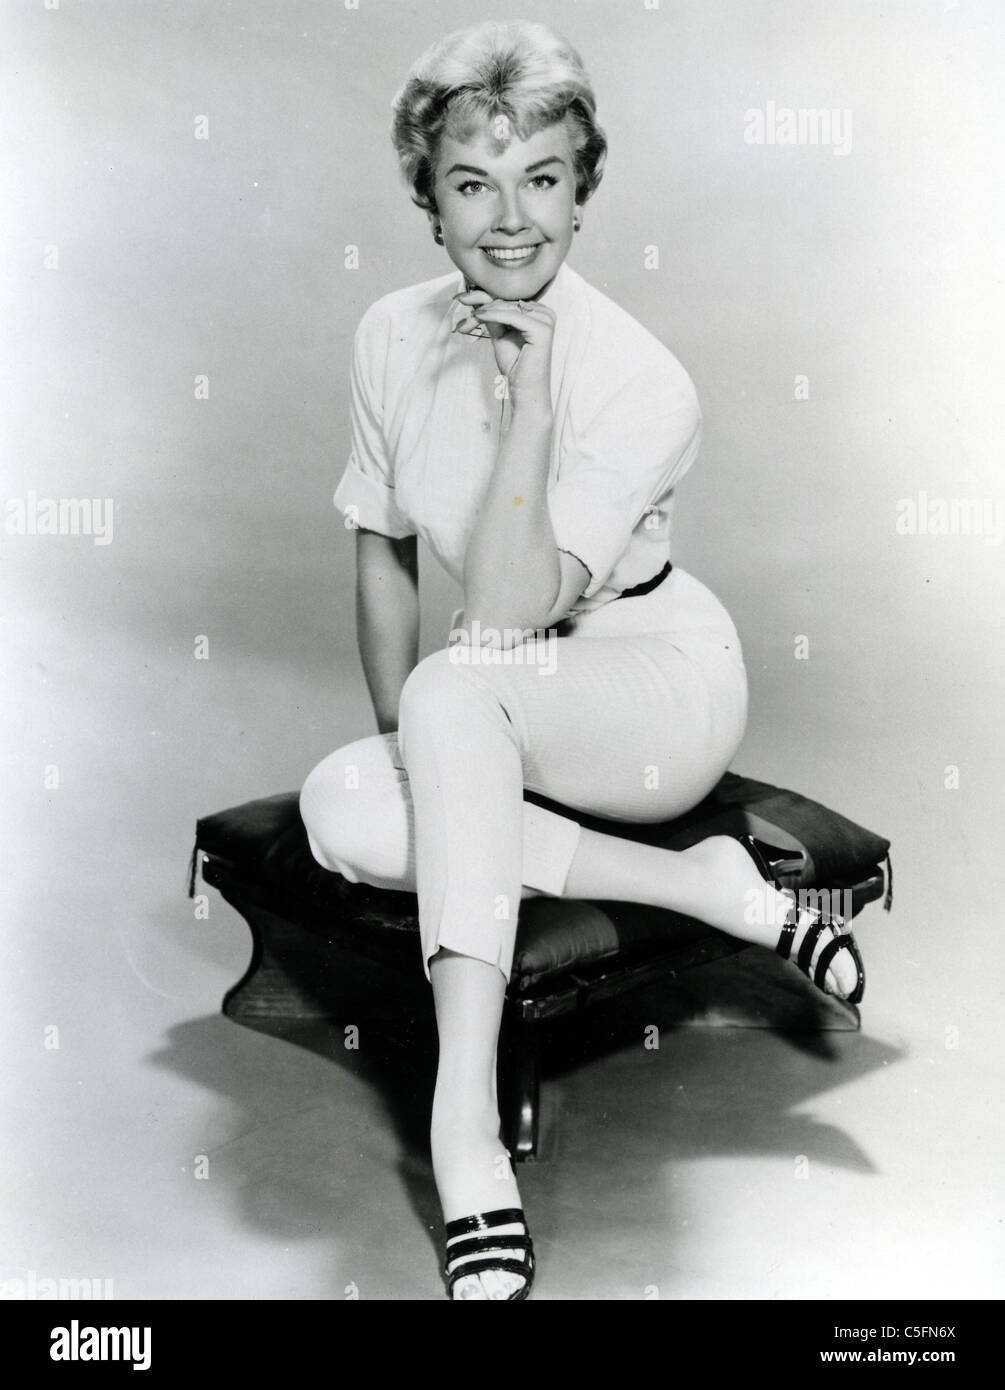 DORIS DAY US singer and film actress about 1957 Stock Photo - Alamy